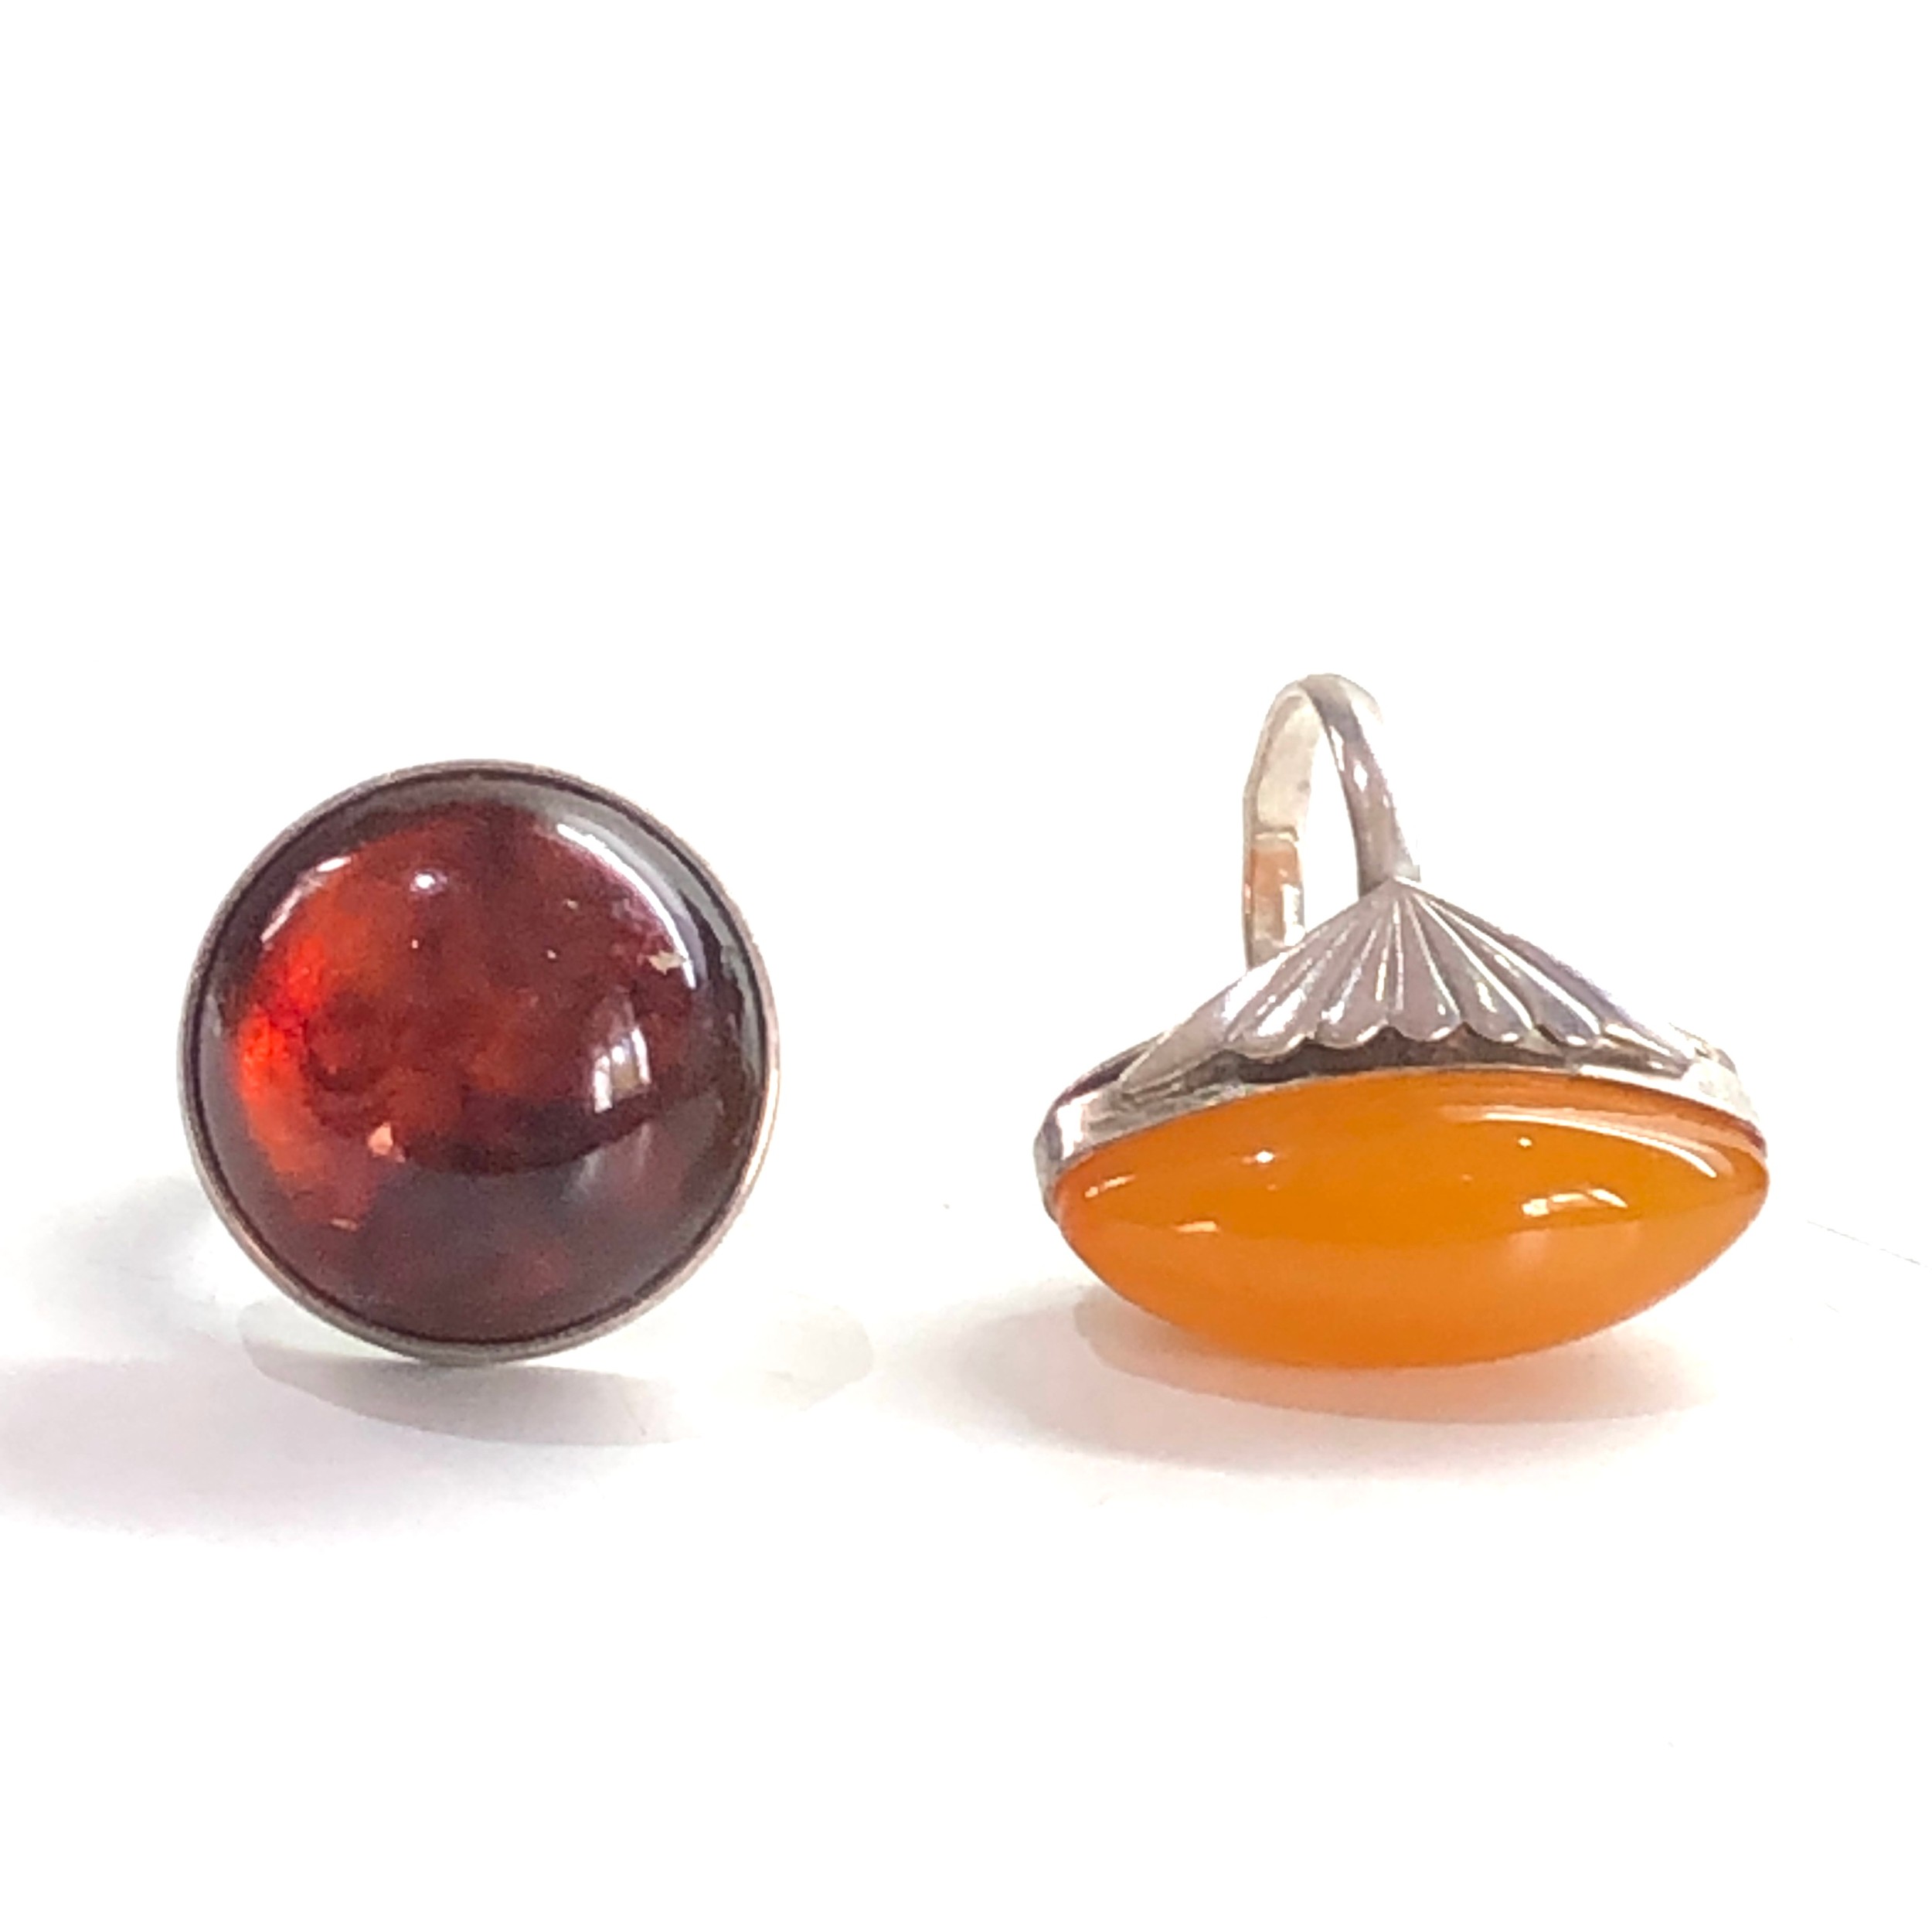 2 silver & amber set rings - Image 2 of 3